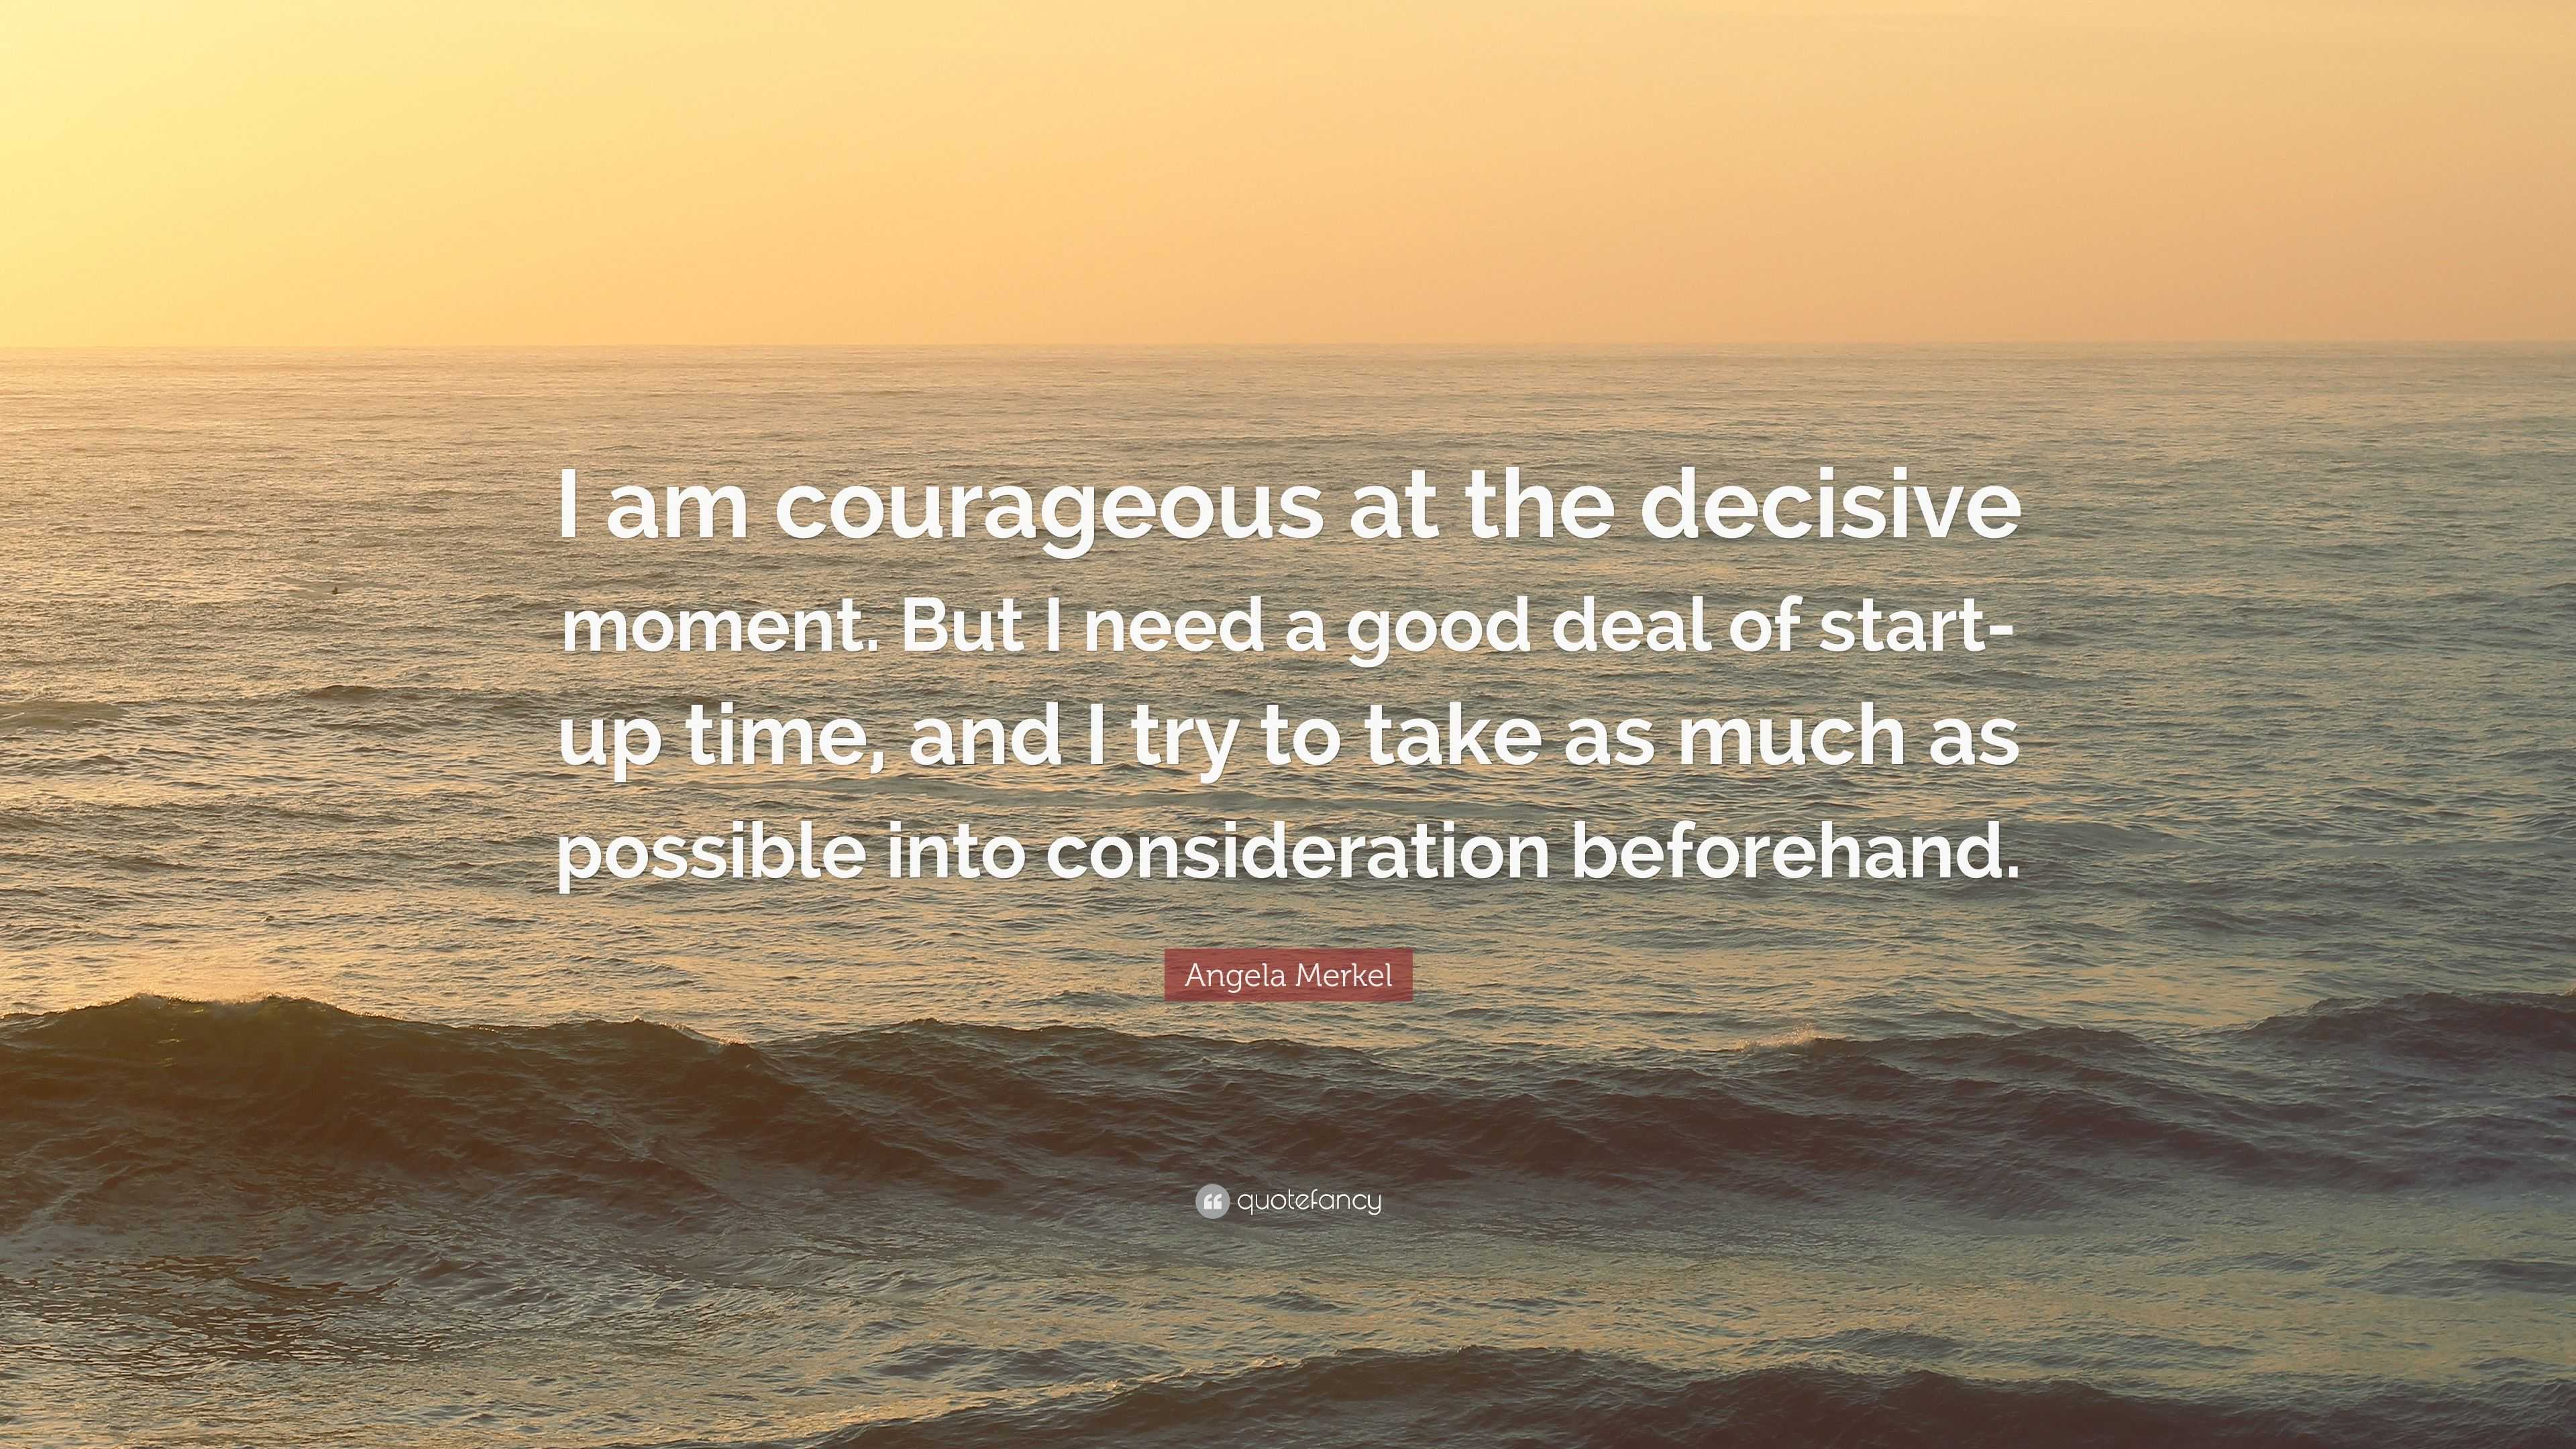 Angela Merkel Quote: “I am courageous at the decisive moment. But I ...